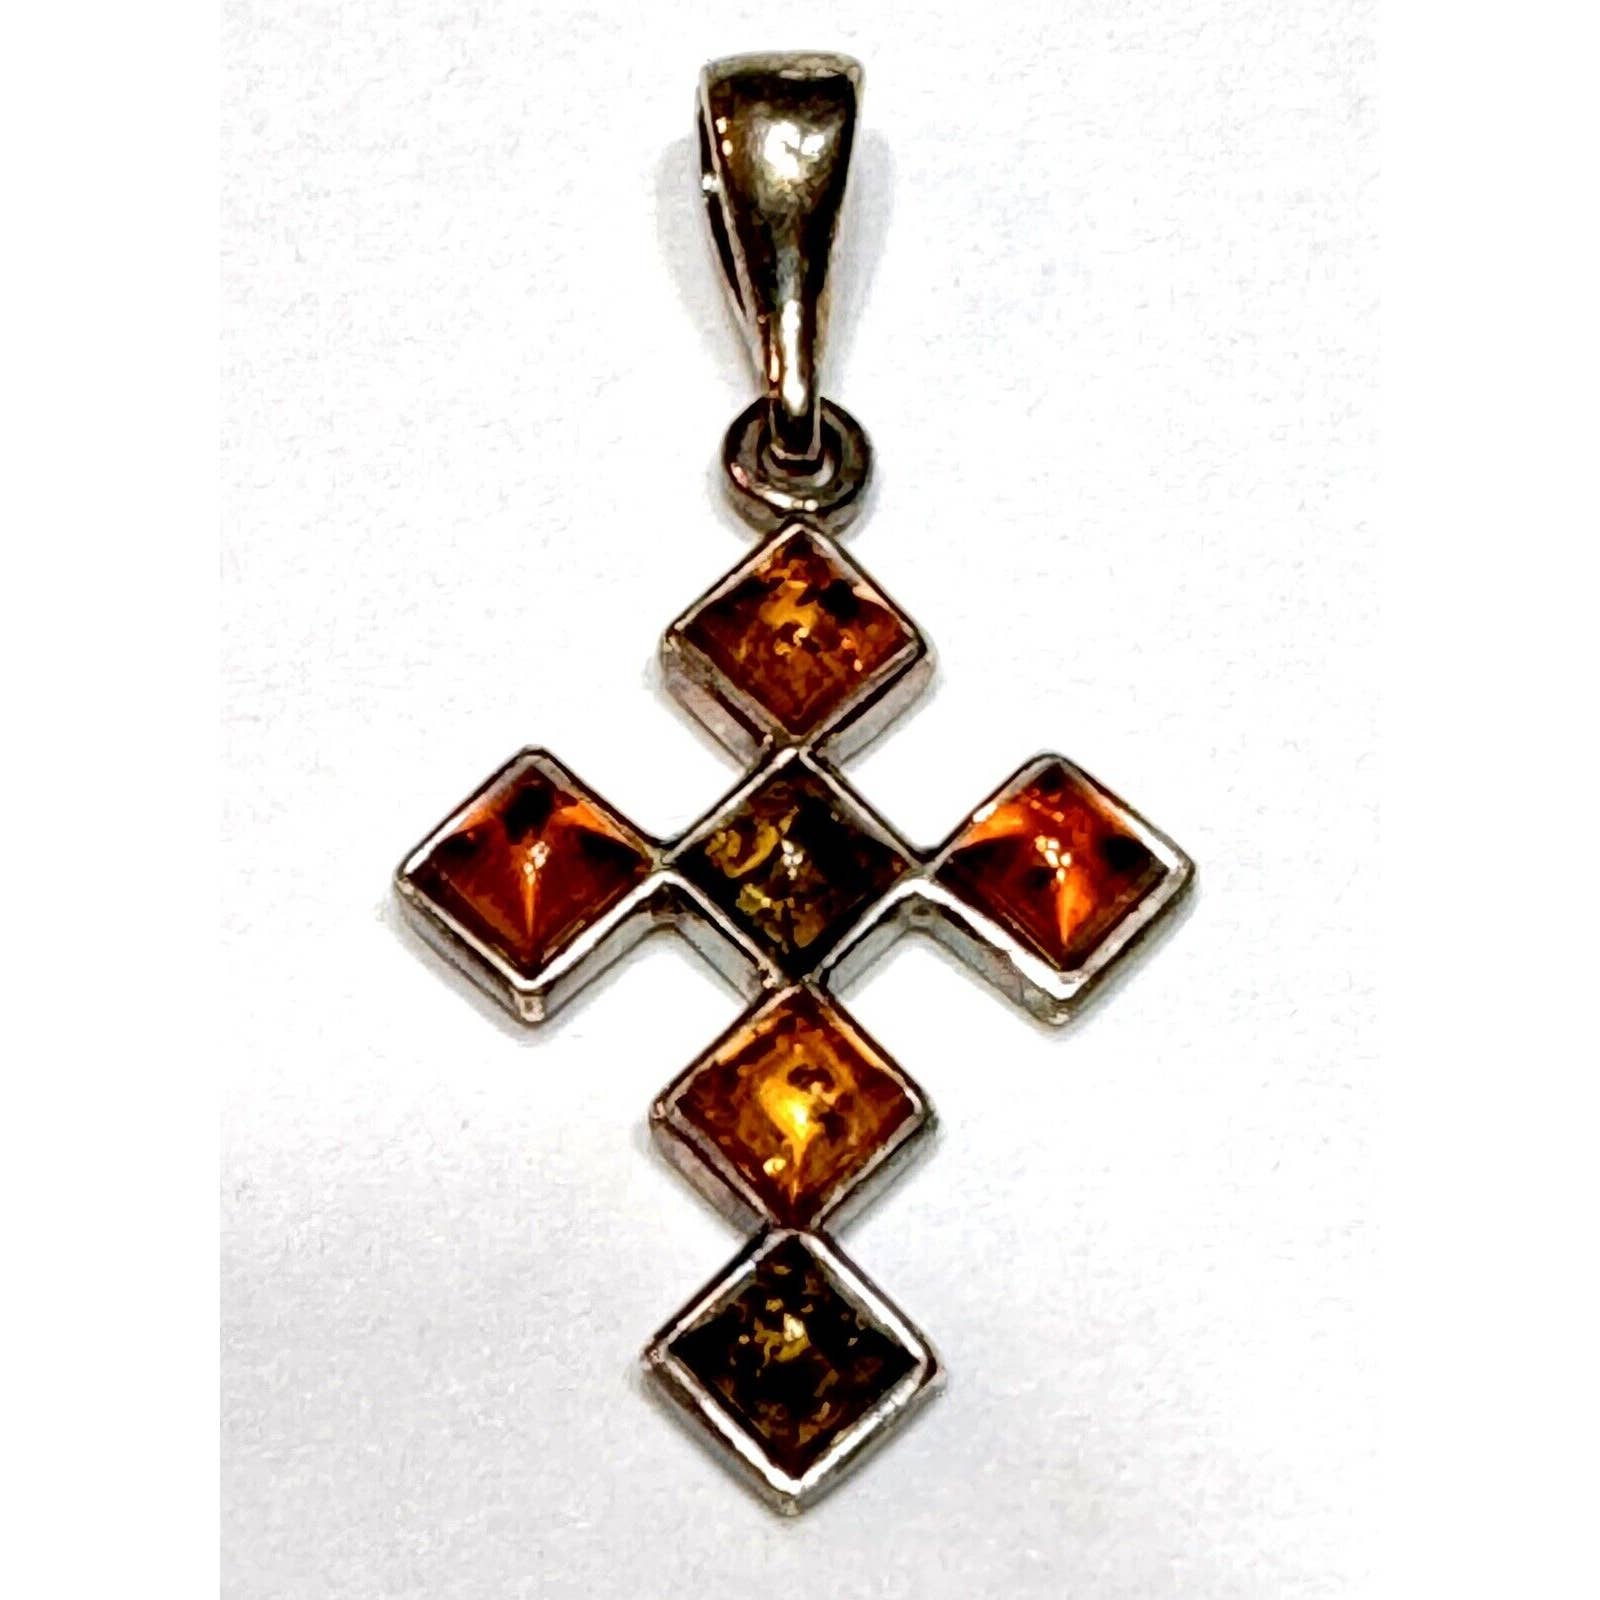 unknoSterling Silver Crucifix Cross Pendant Necklace Baltic Amber - Tested - Black Dog Vintage